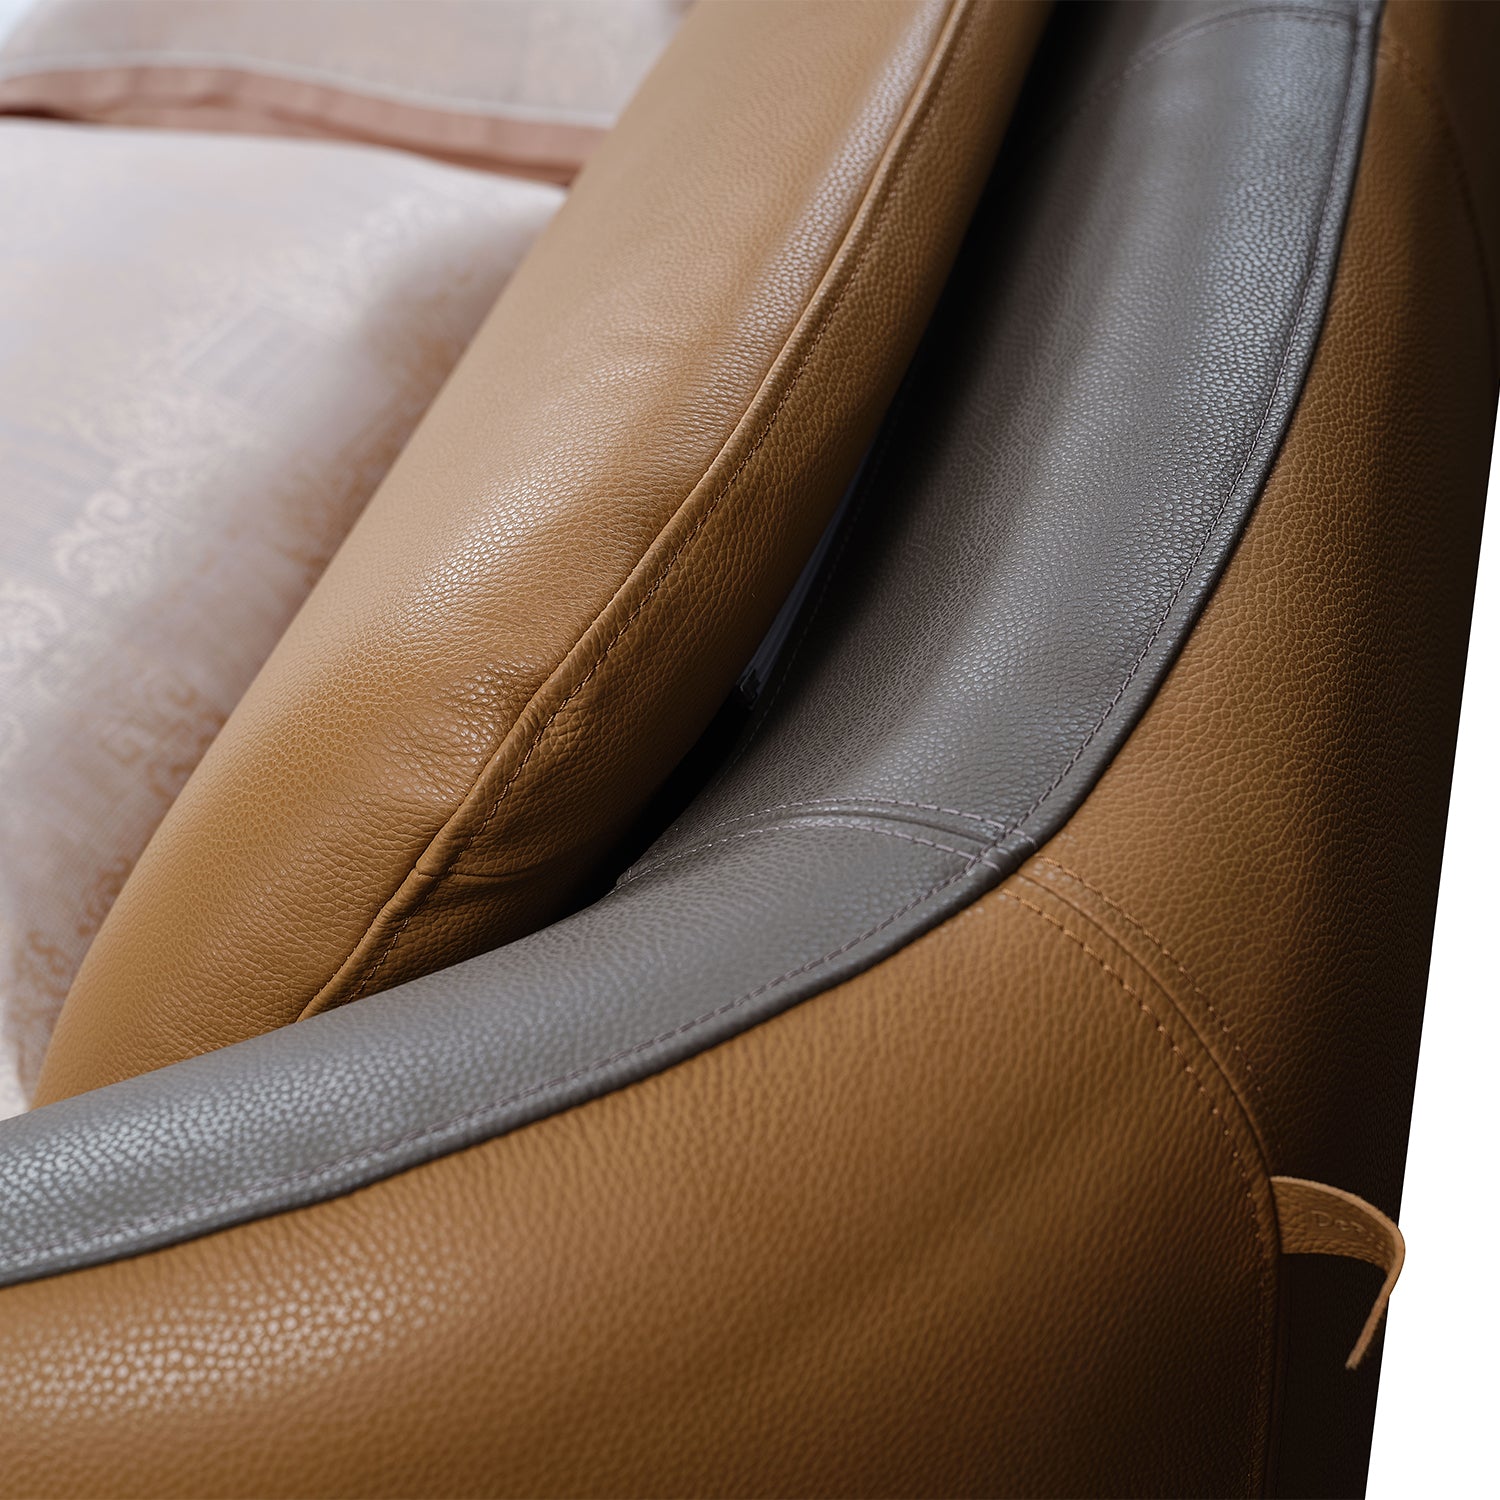 Close-up of DeRUCCI Bed Frame BZZ4-090 featuring bold orange and ash gray leather upholstery with detailed stitching.